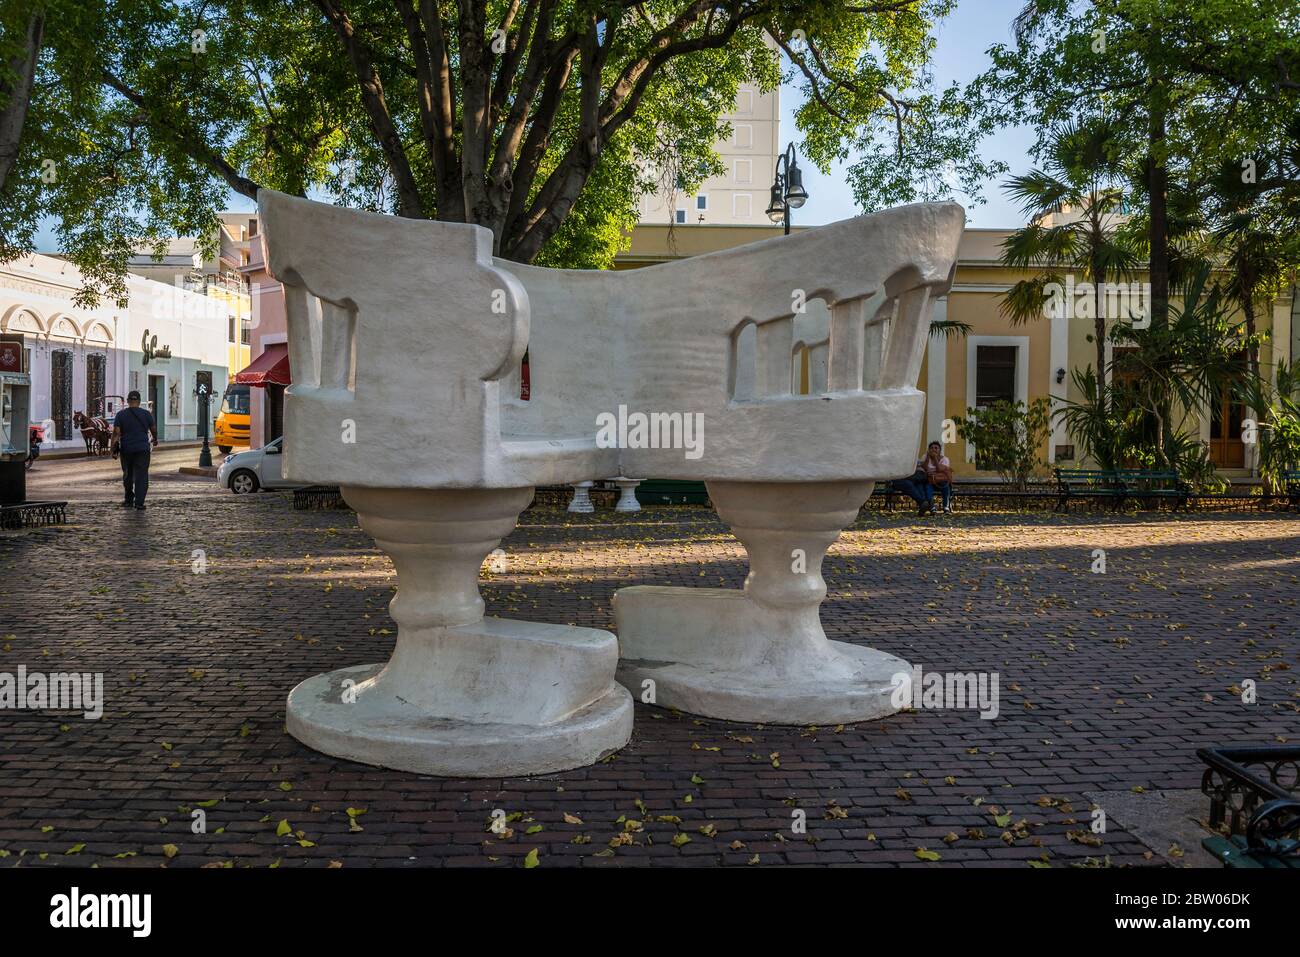 Lovers' Chair - a giant twin chair with two seats, Santa Lucia Park, a popular downtown square, Merida, Yucatan, Mexico Stock Photo